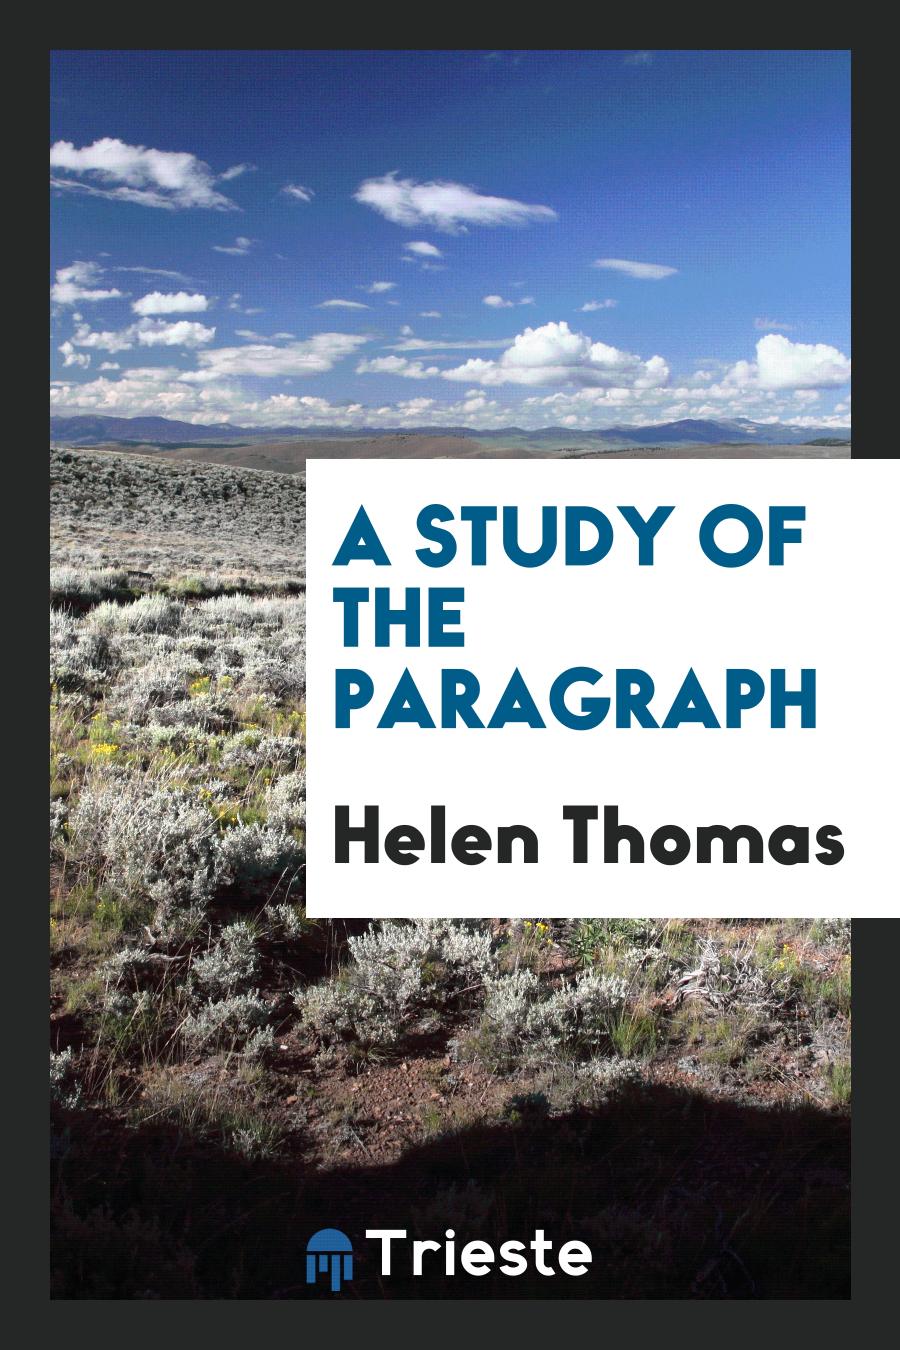 A Study of the Paragraph